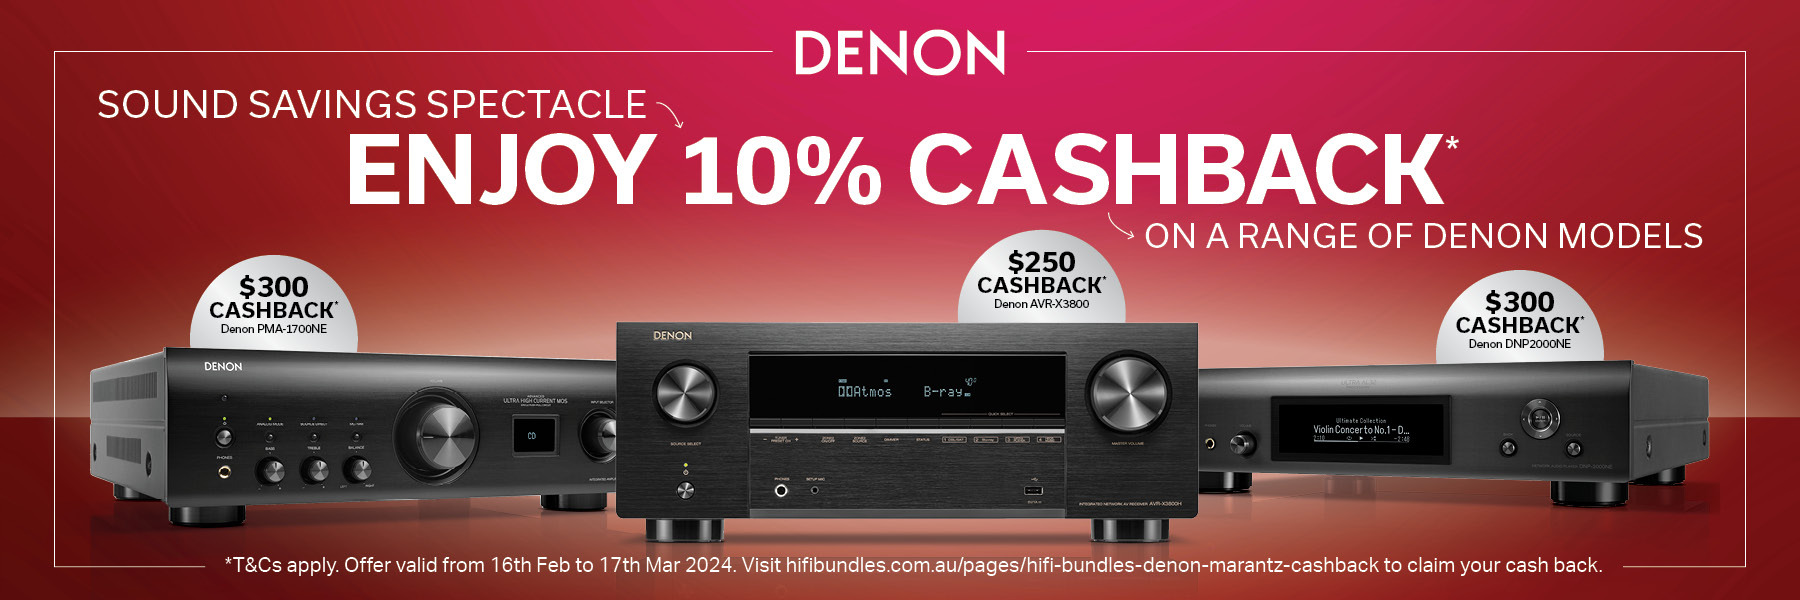 Denon Poster, displaying the current 10% Cashback offer, valid toll 17th March 2024.